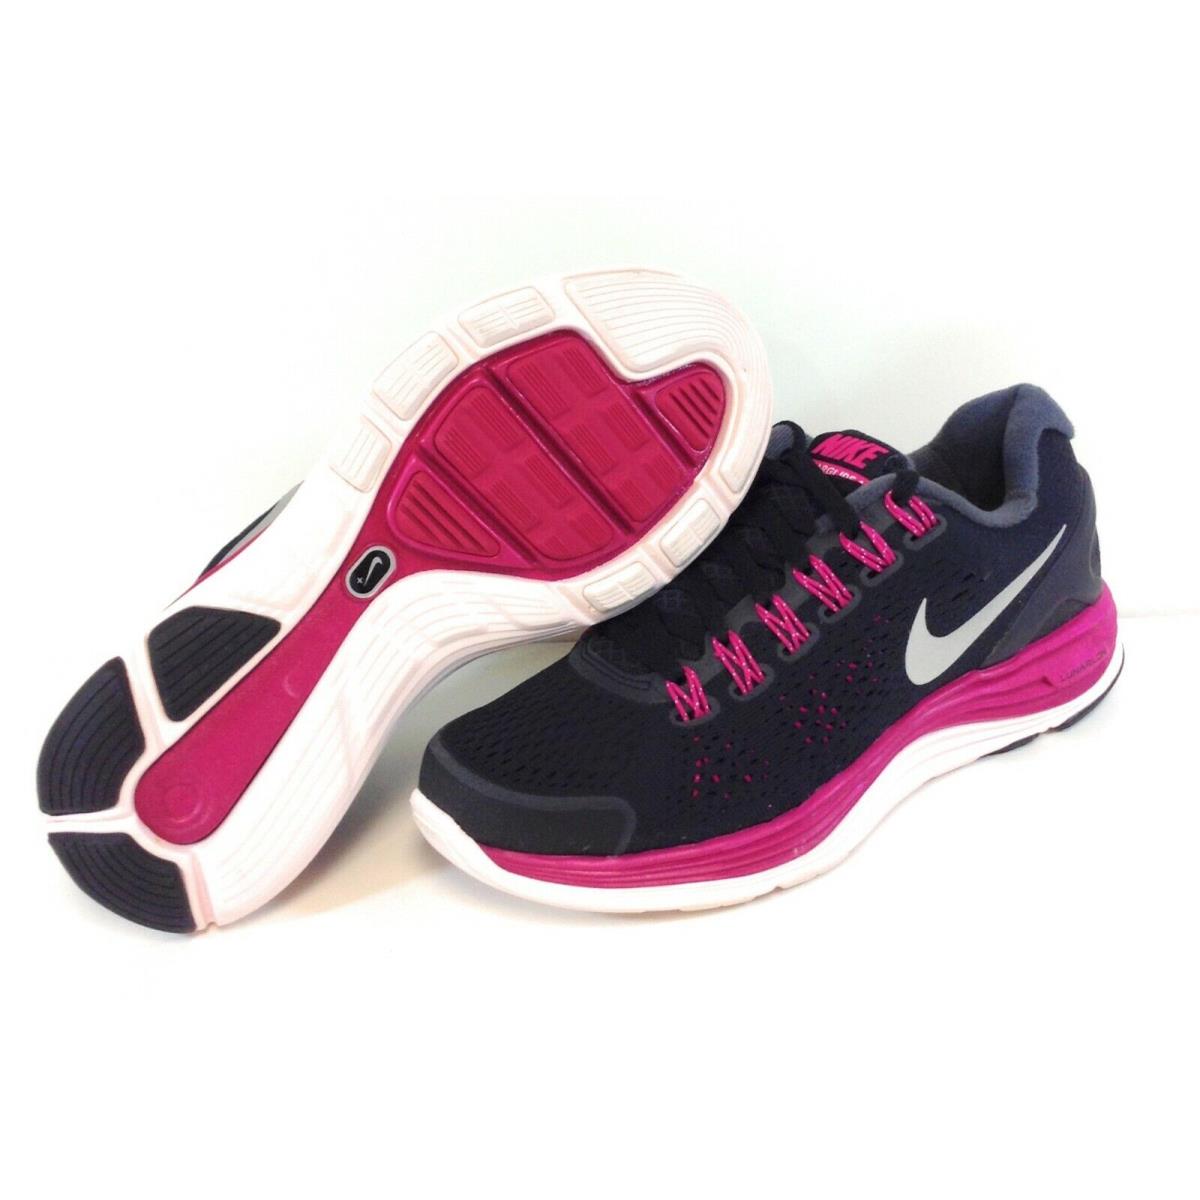 Womens Nike Lunarglide + 4 524978 006 Black Fireberry 2012 DS Sneakers Shoes